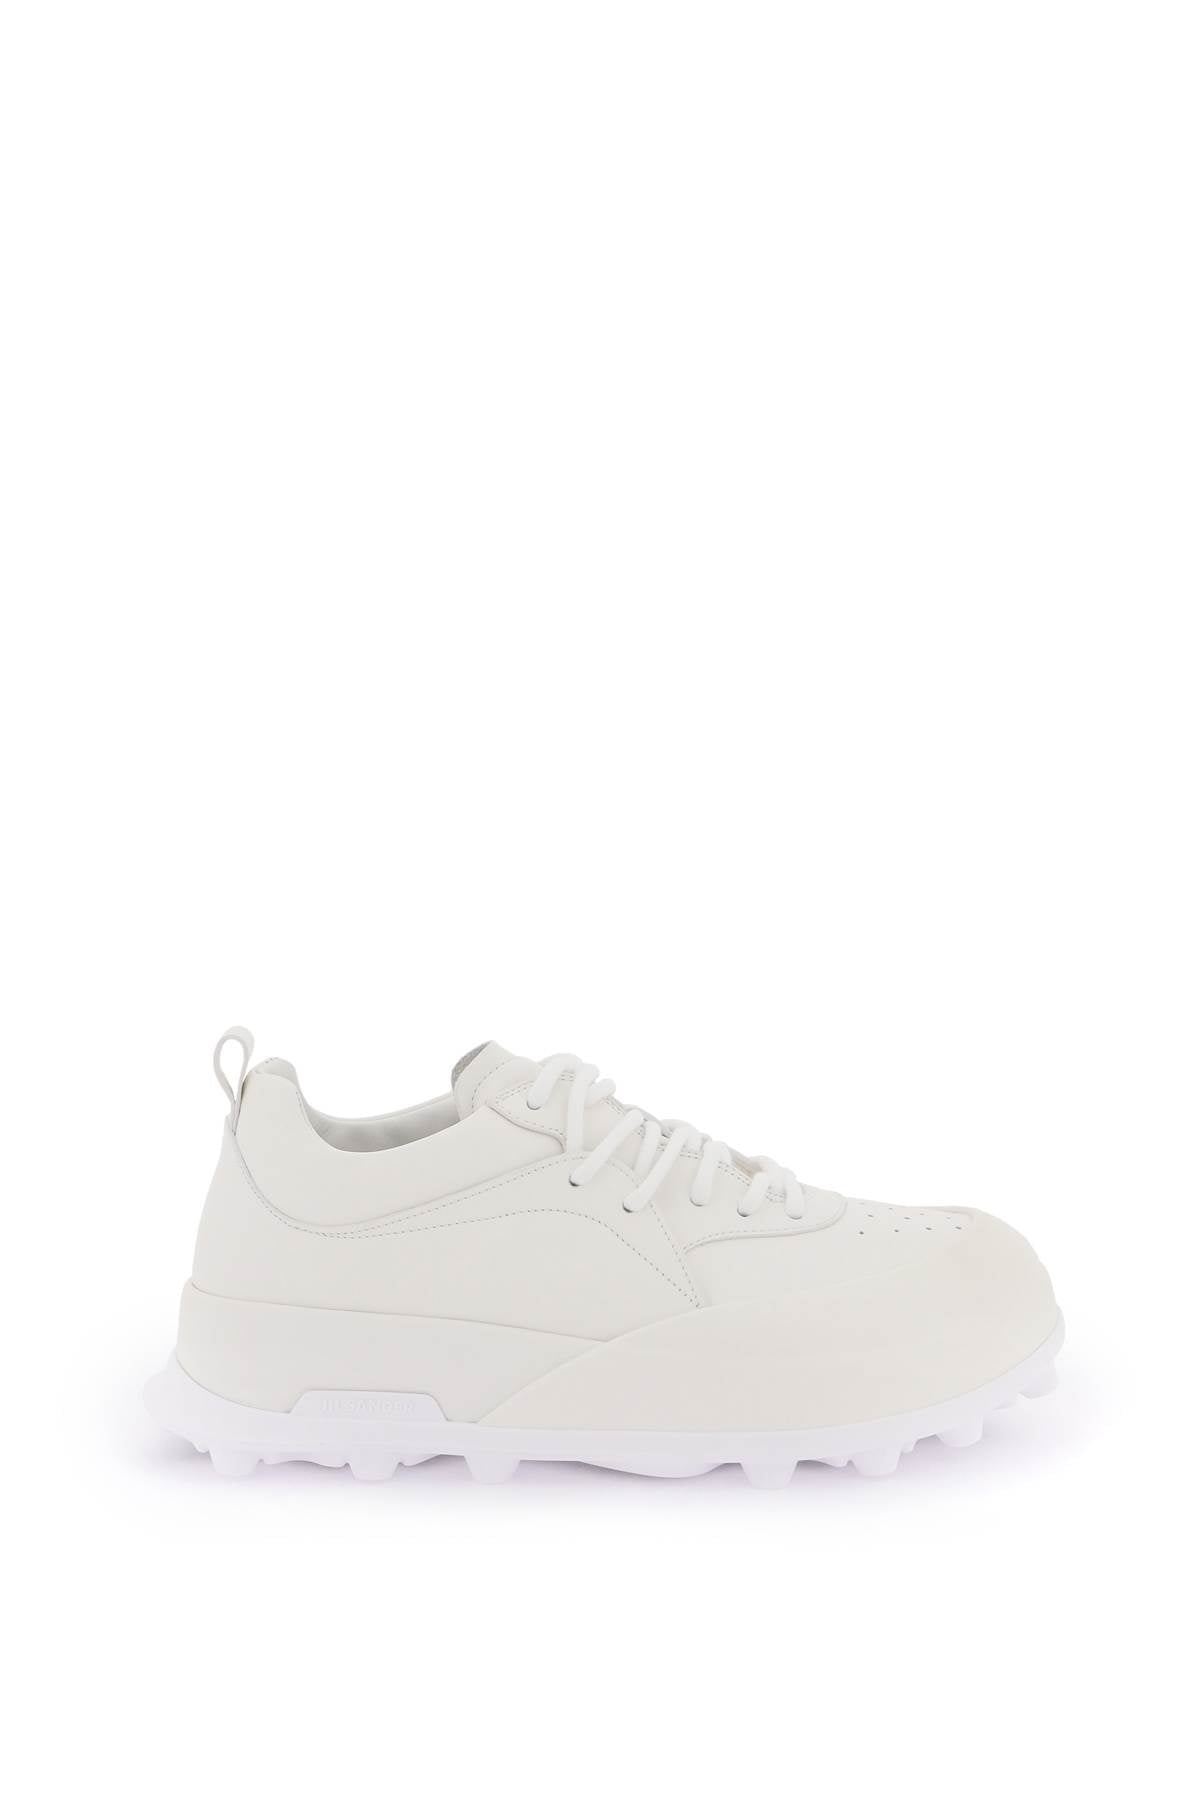 JIL SANDER ORB LOW-TOP Leather Sneakers for Men - White